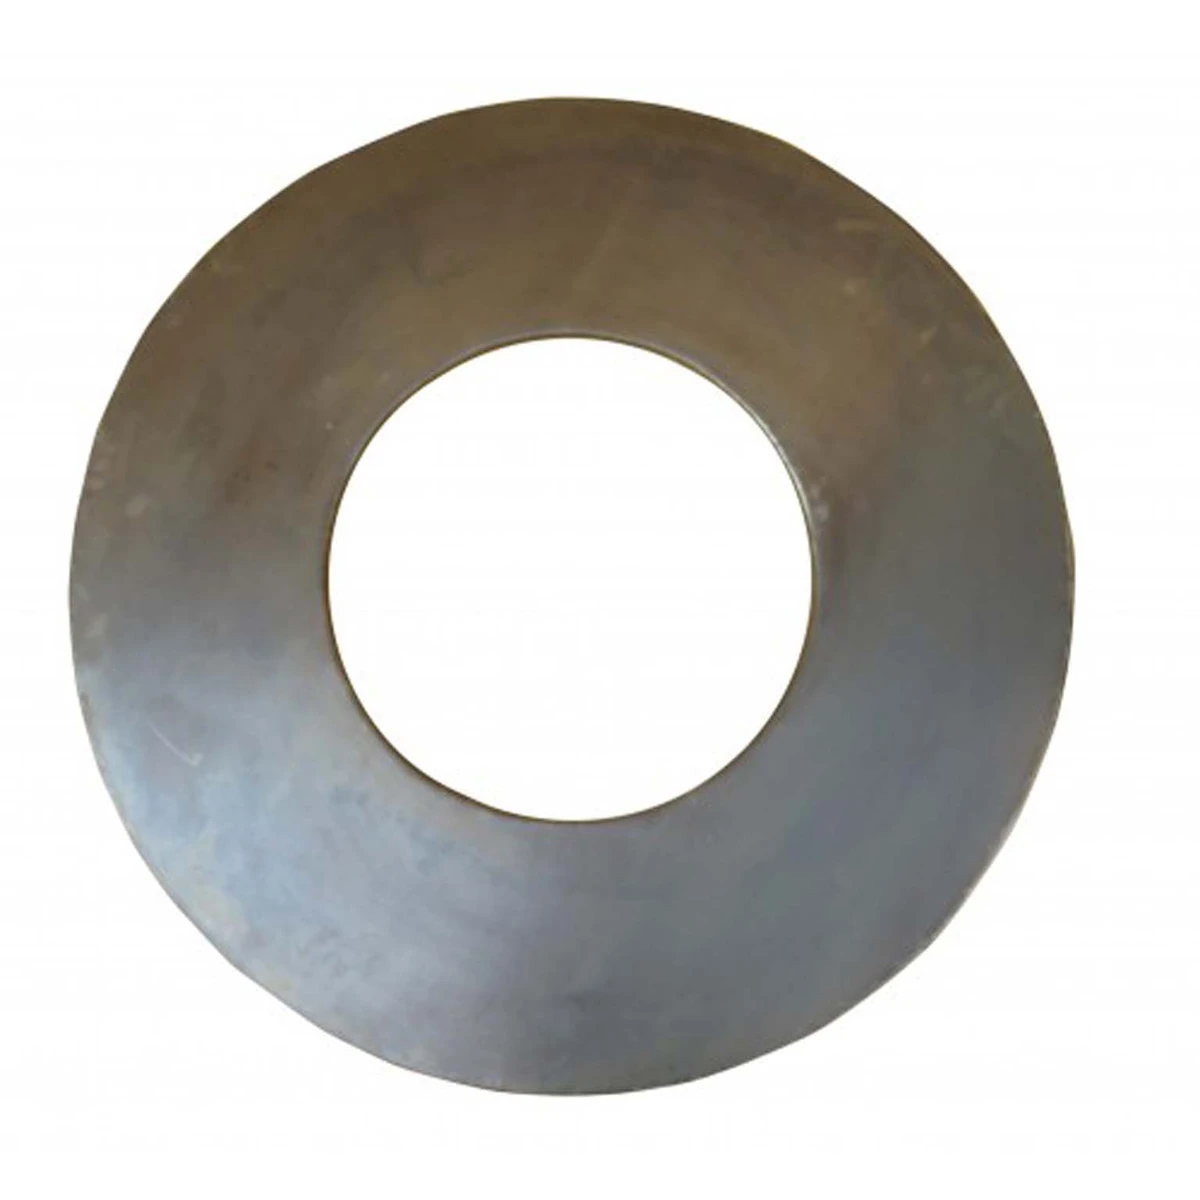 Kadai Hot Plate Ring - To Fit 100cm - image 1